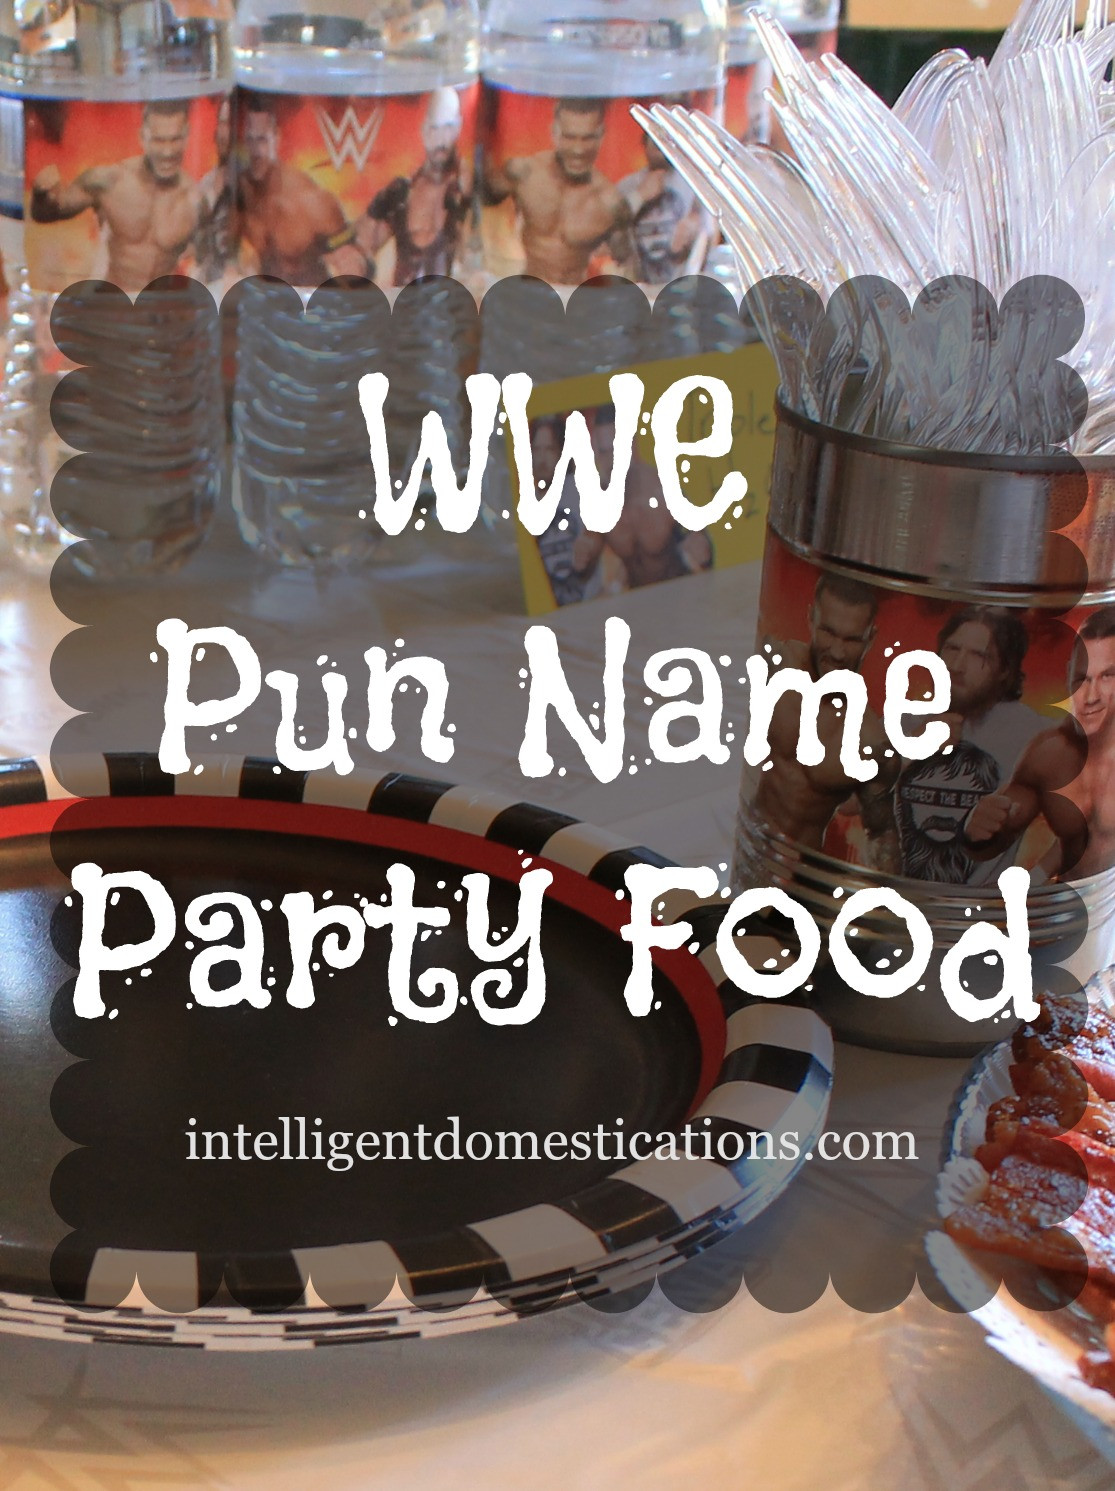 Birthday Party Names
 WWE Party Food with Pun Names